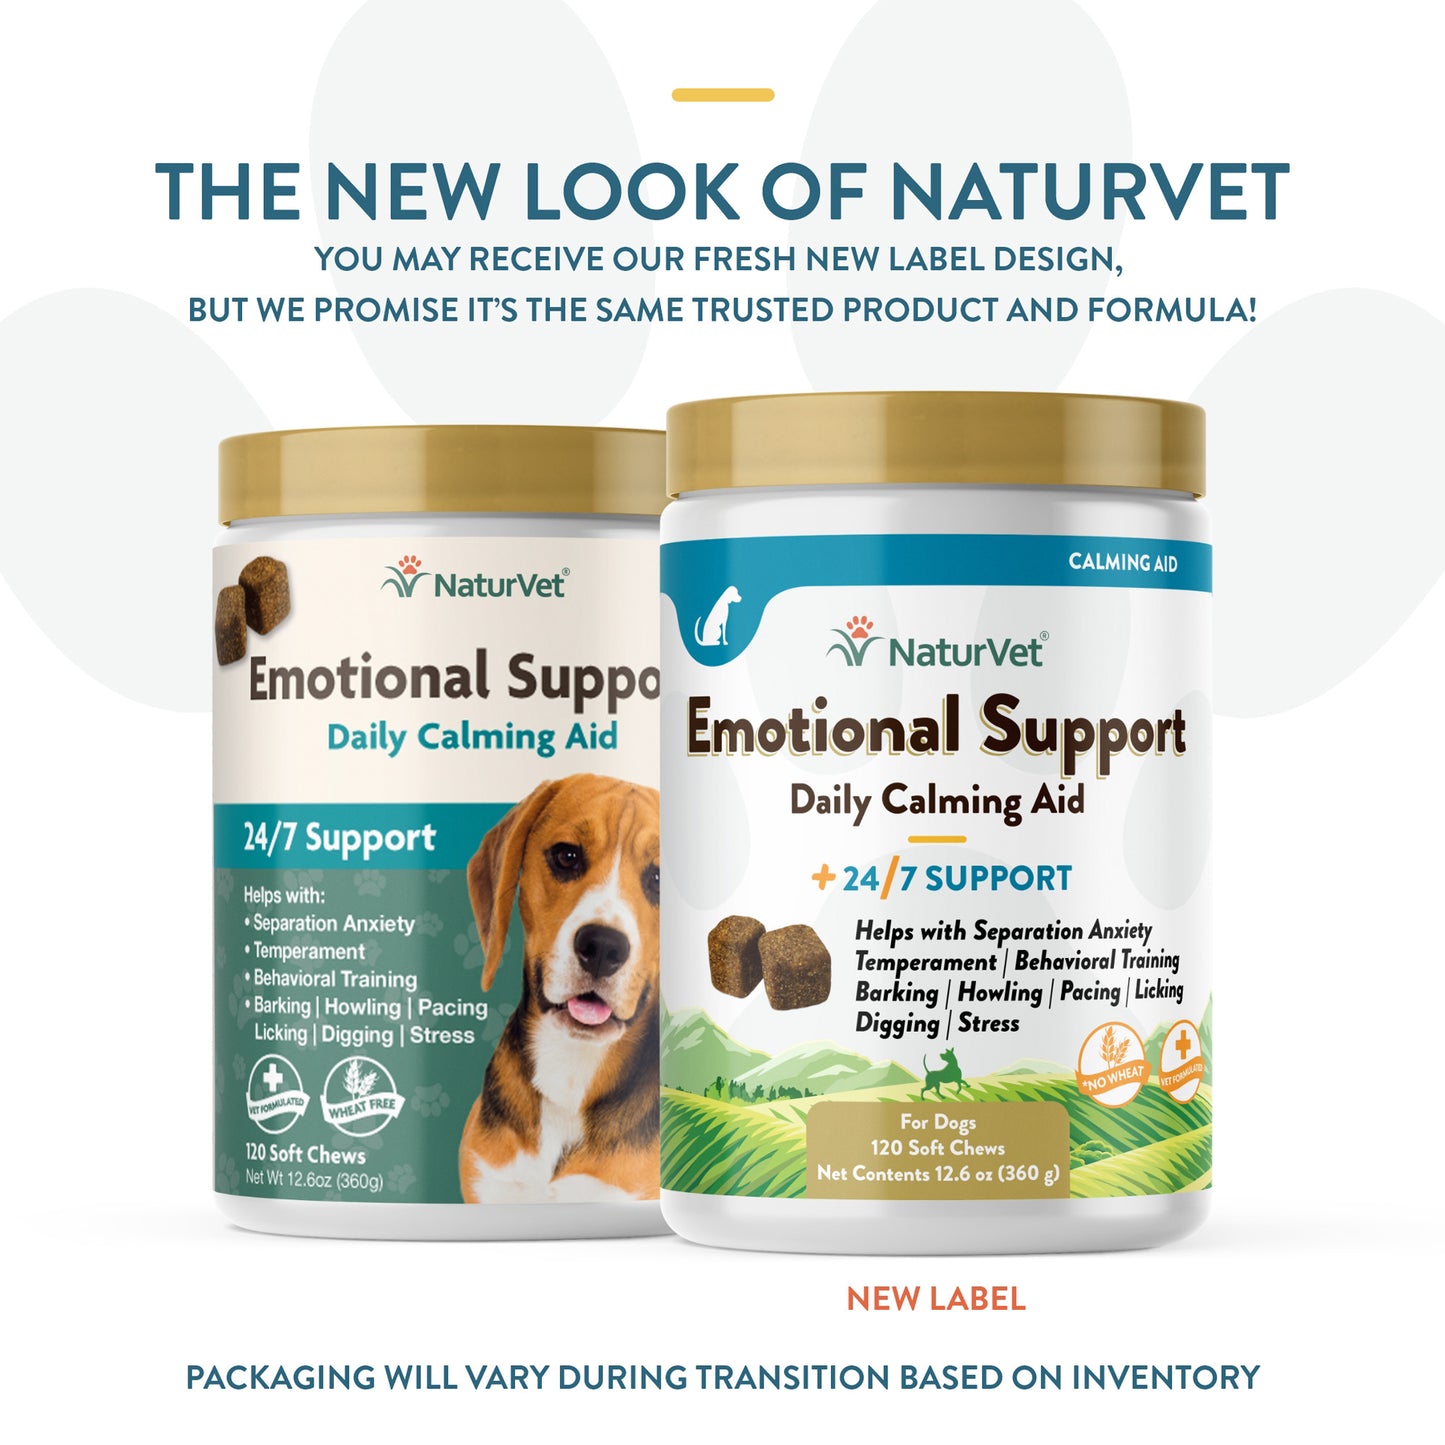 Emotional Support Dog Calming Aid (24/7 Support)